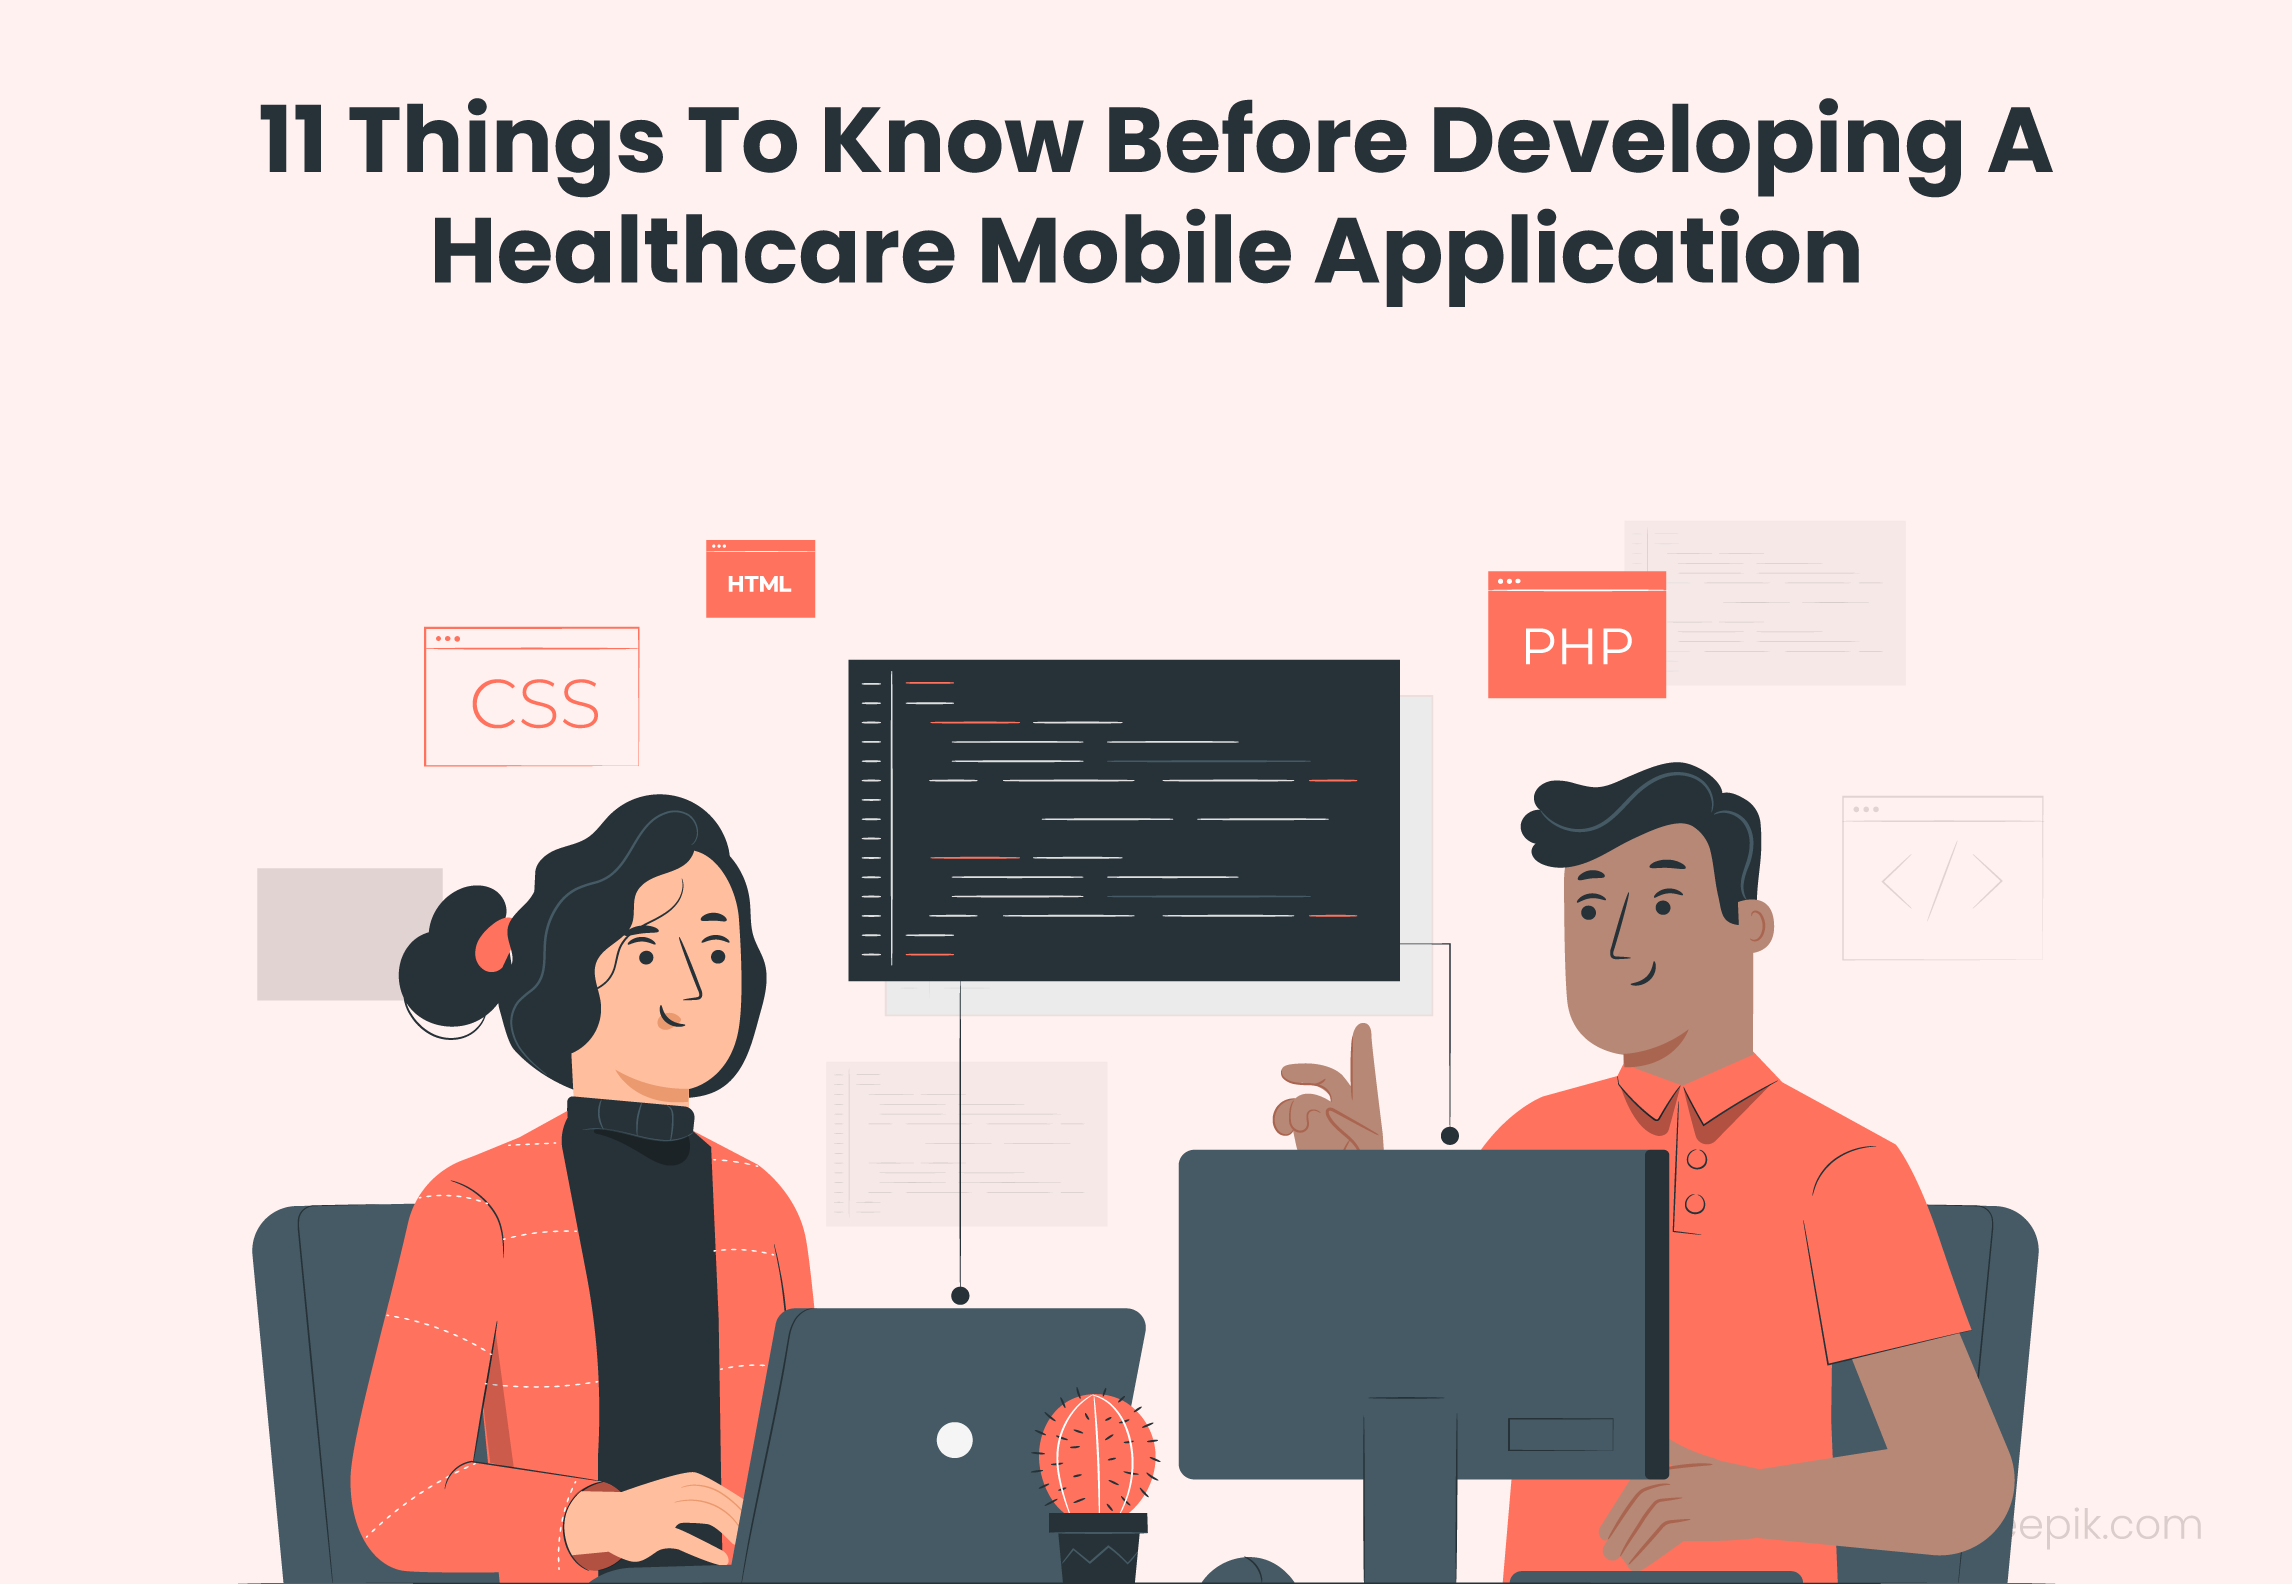 11-Things-To-Know-Before-Developing-A-Healthcare-Mobile-Application